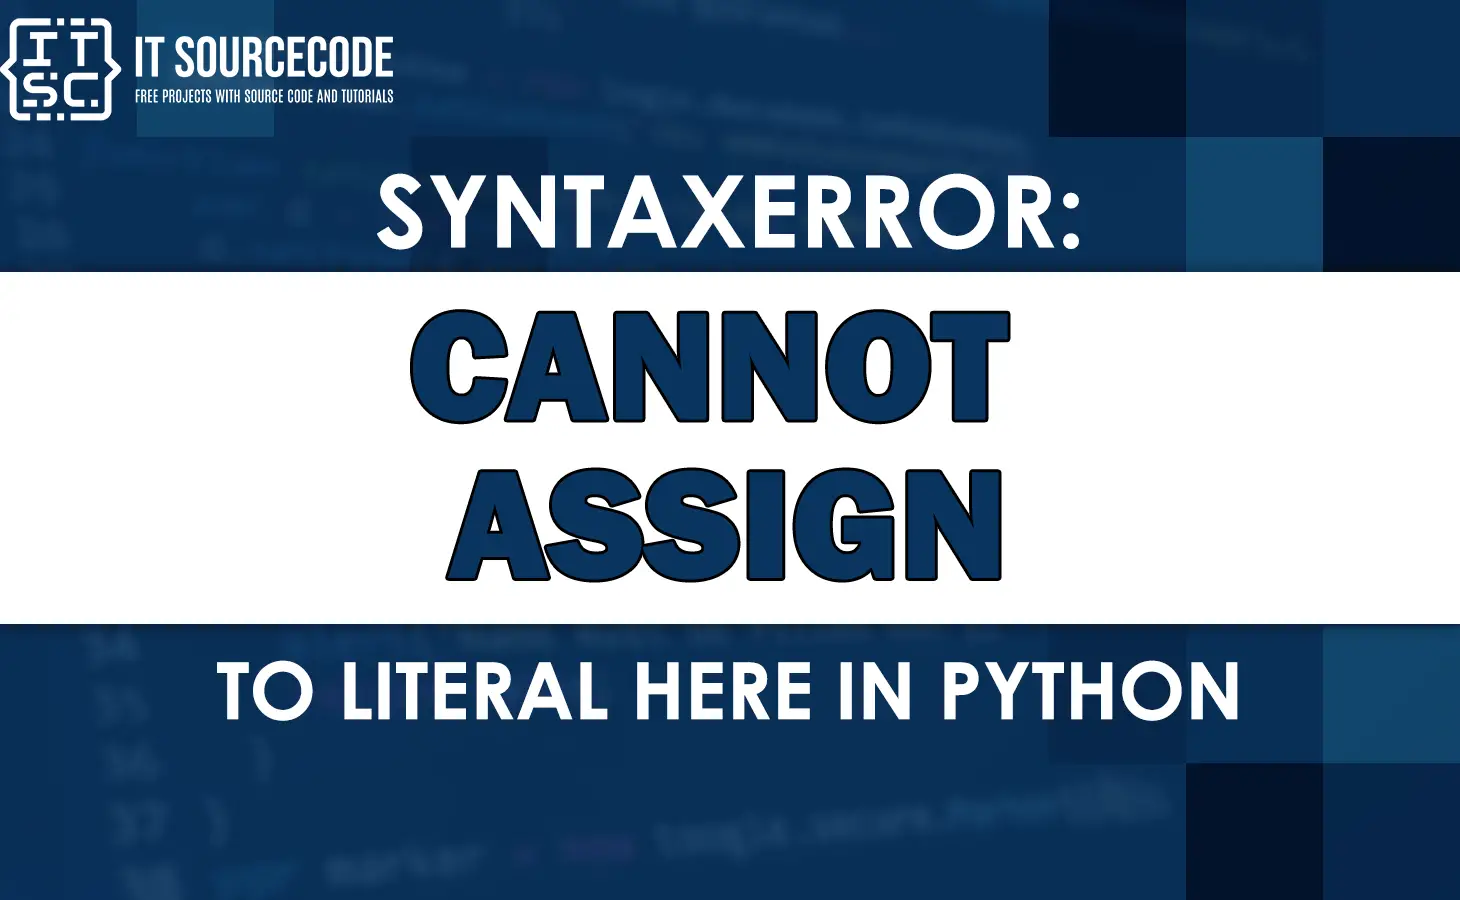 Syntaxerror: cannot assign to literal here in Python